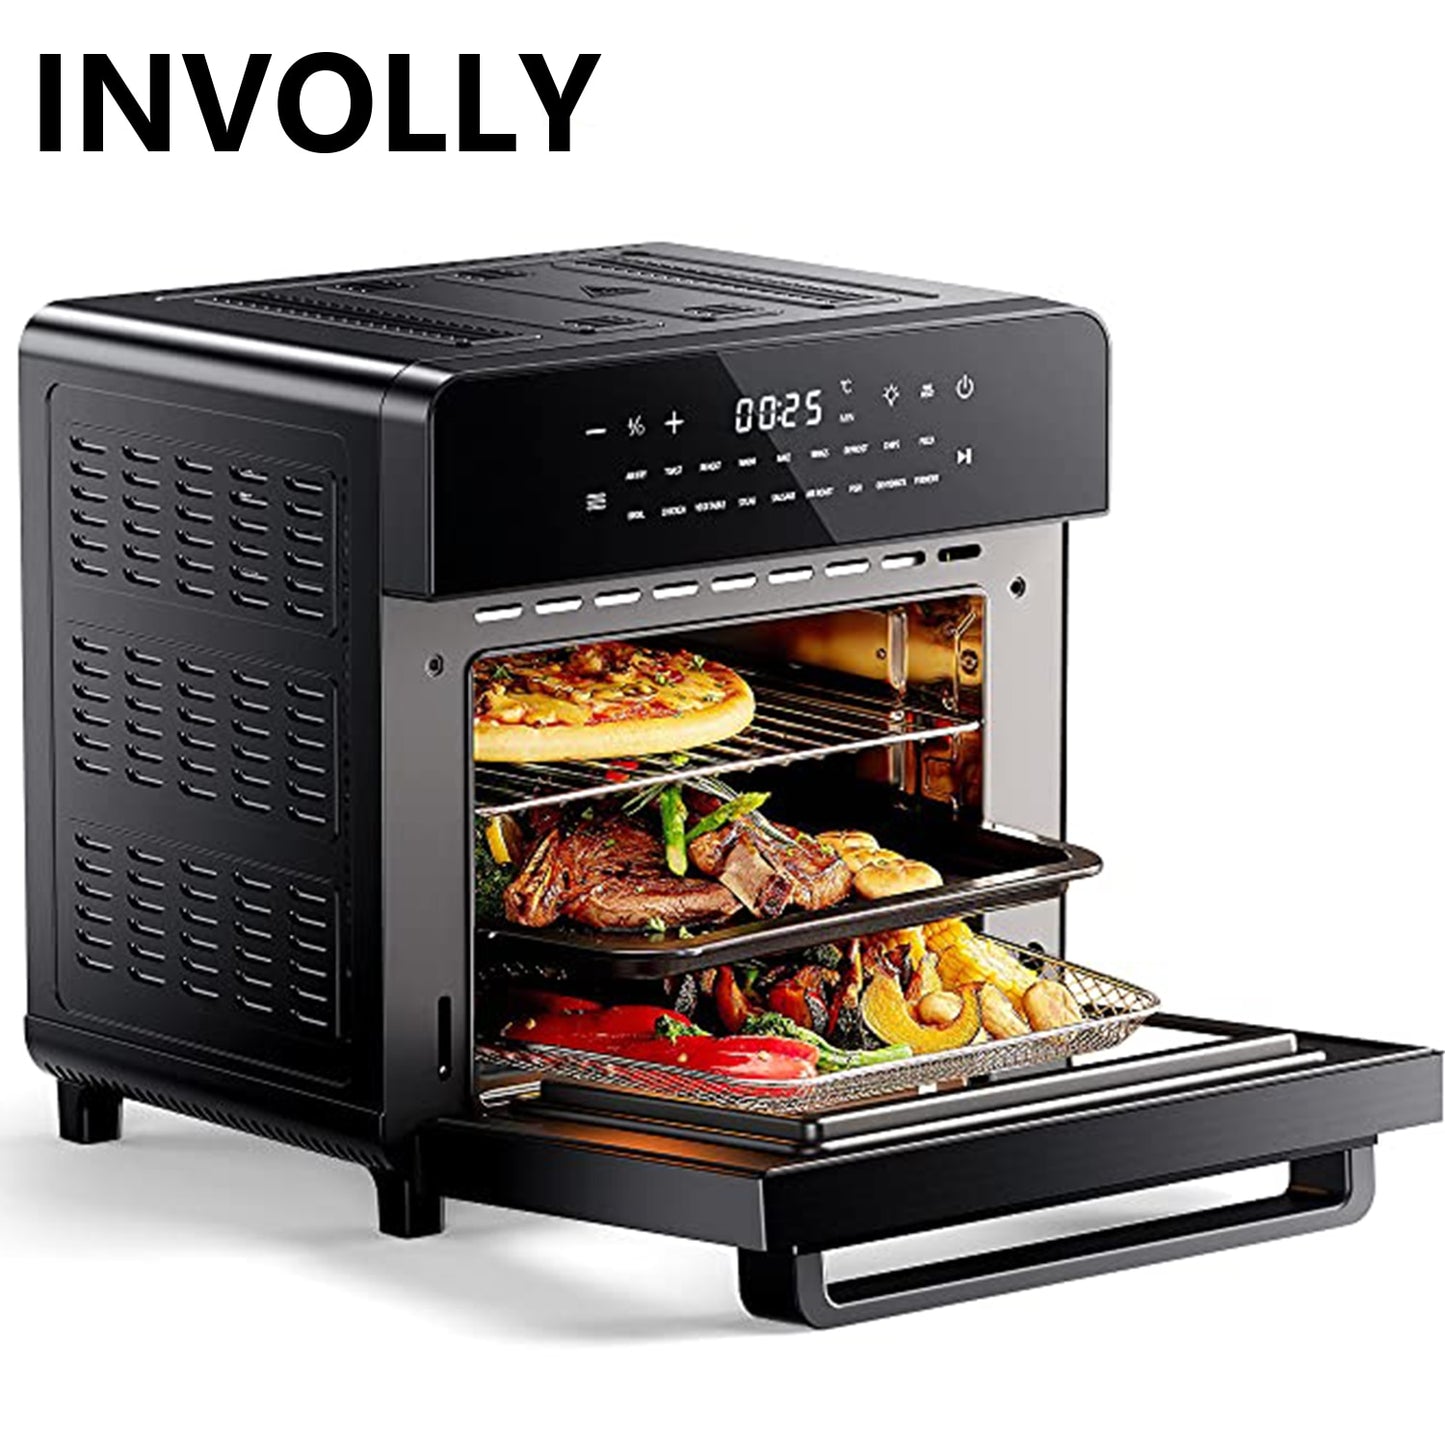 INVOLLY 15L Air Fryer Oven, Countertop Convection Mini Oven, 18 in 1 Digital Table-top Air Fryer Toaster Oven - youronestopstore23